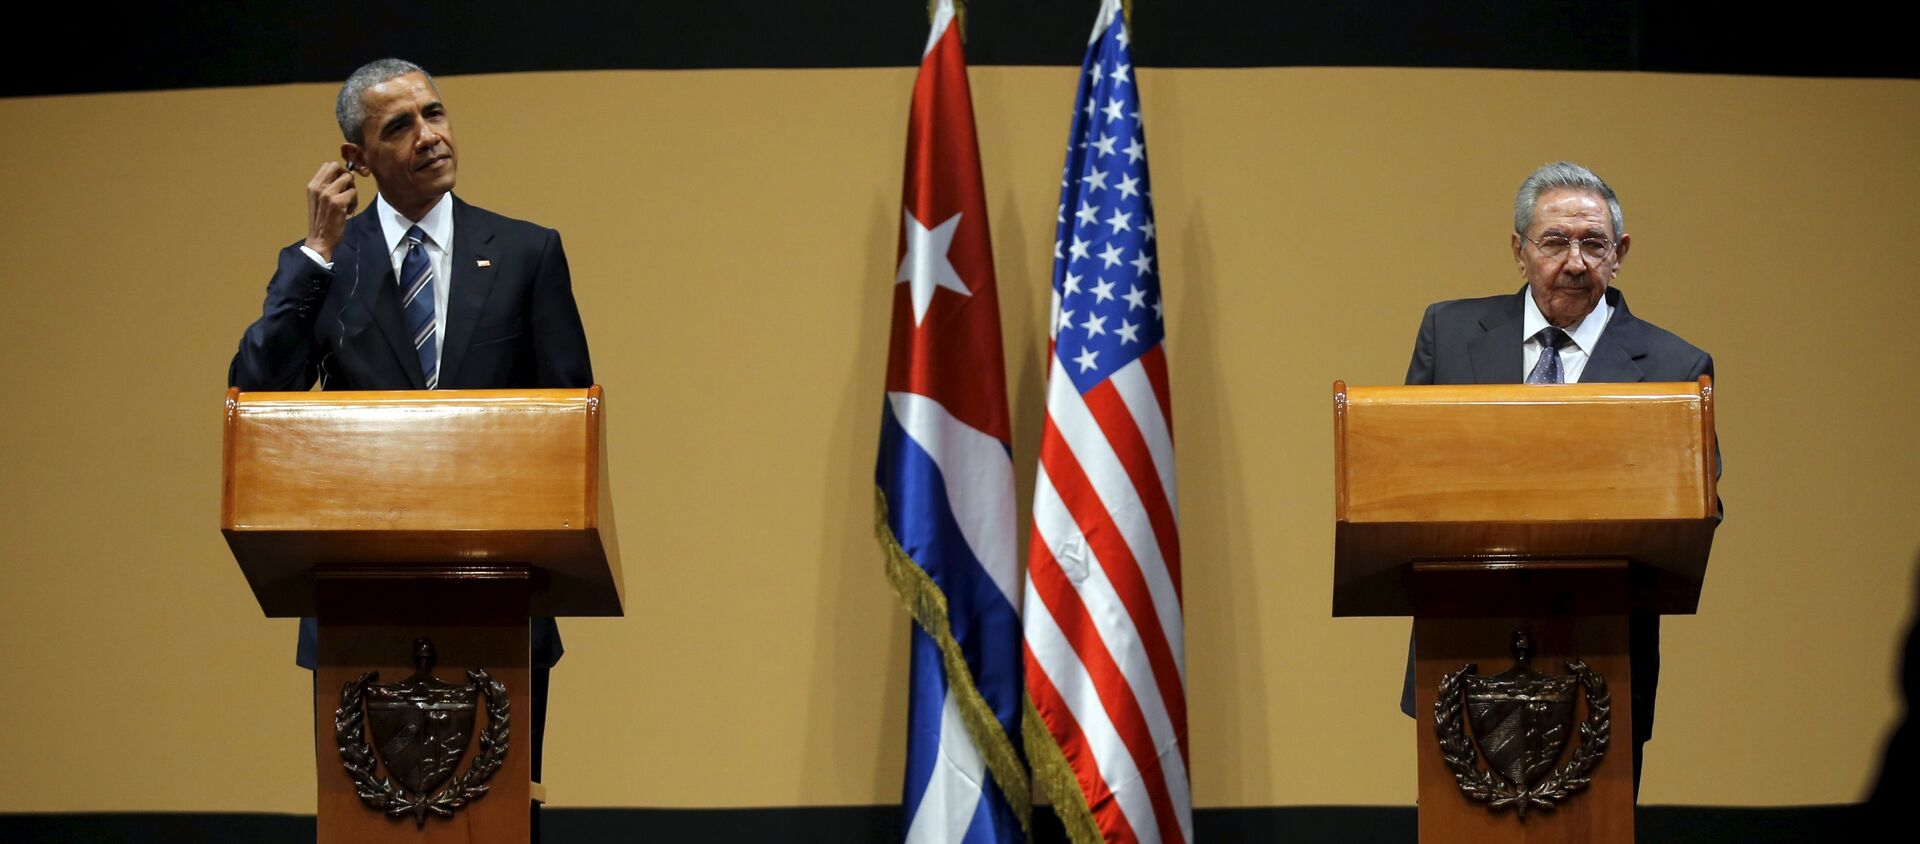 U.S. President Barack Obama and Cuban President Raul Castro attend a news conference as part of President Obama's three-day visit to Cuba, in Havana March 21, 2016 - Sputnik International, 1920, 22.03.2016